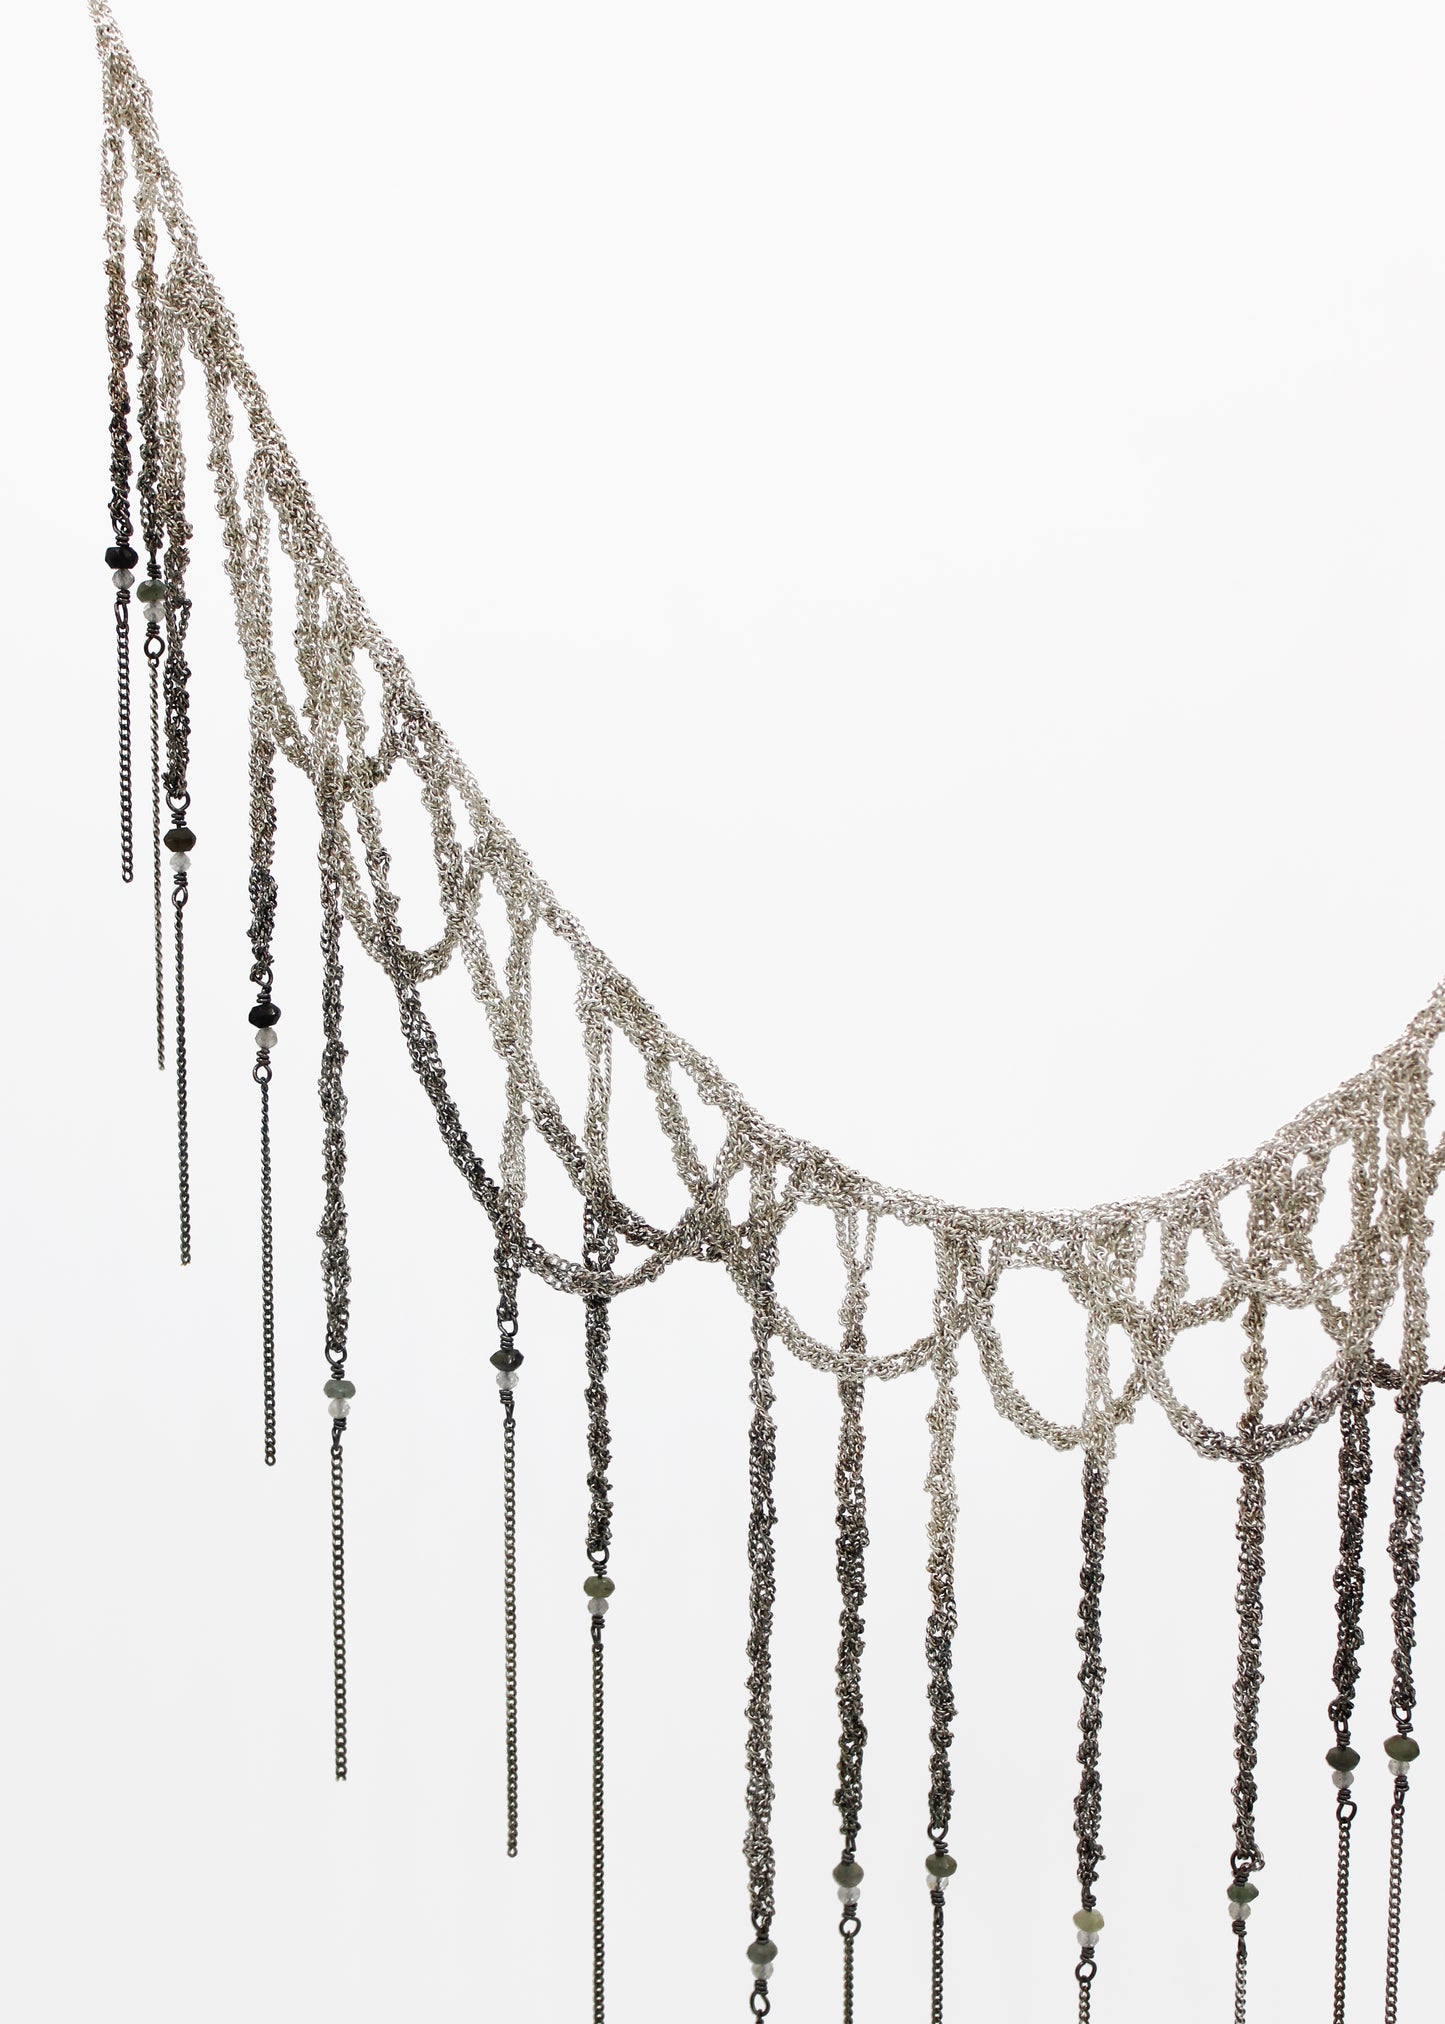 Ombre silver Fringe + Loop necklace